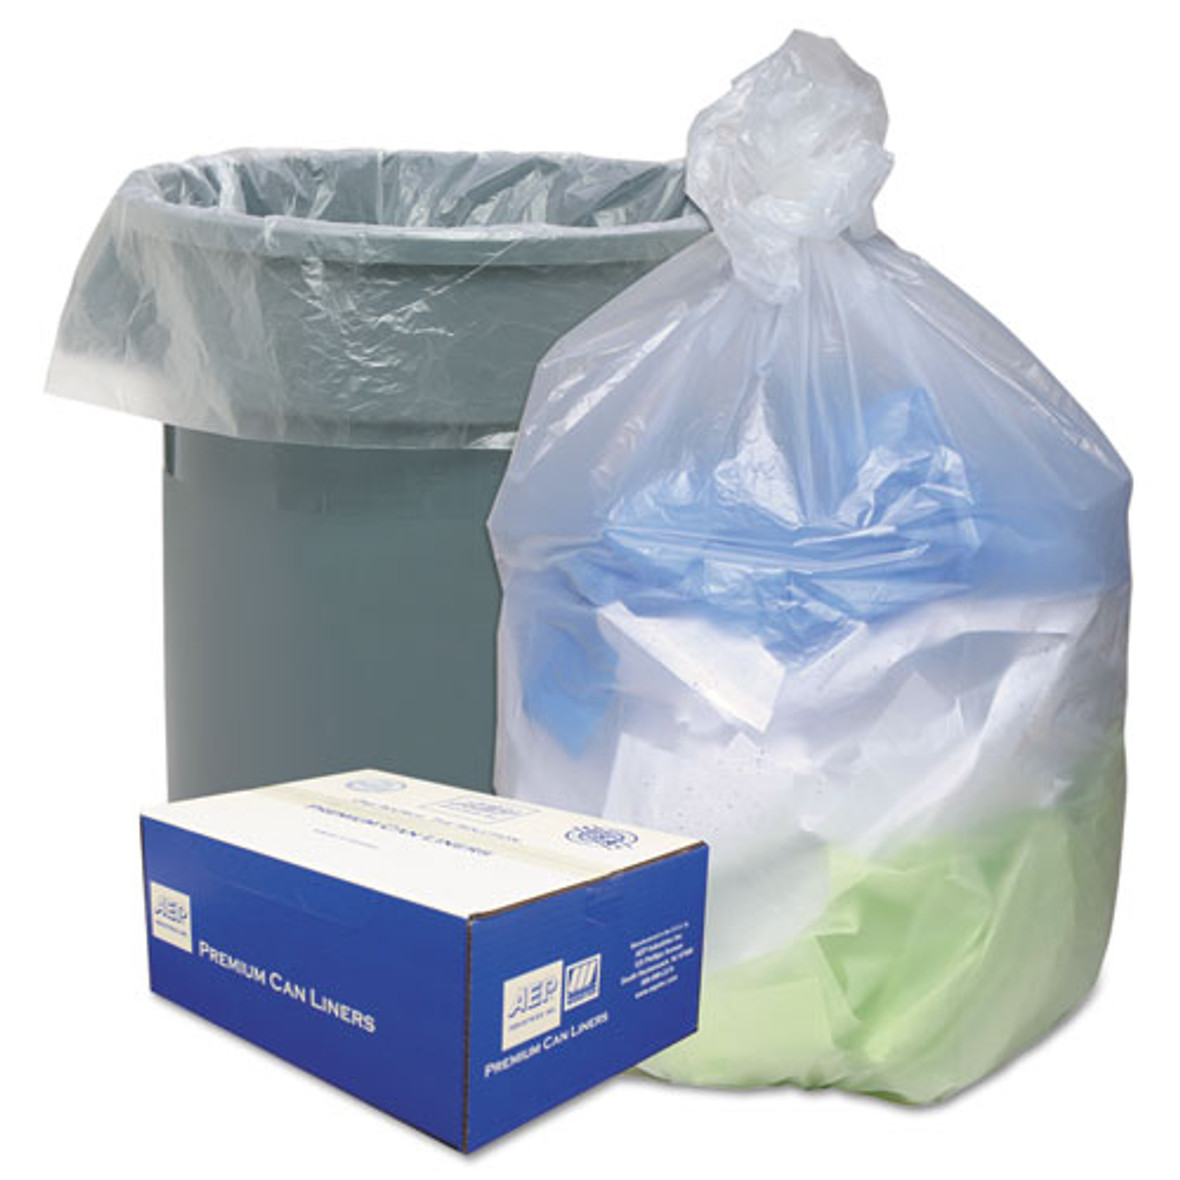 Inteplast Group High-Density Interleaved Commercial Can Liners, 30 gal, 16 microns, 30 x 37, Clear